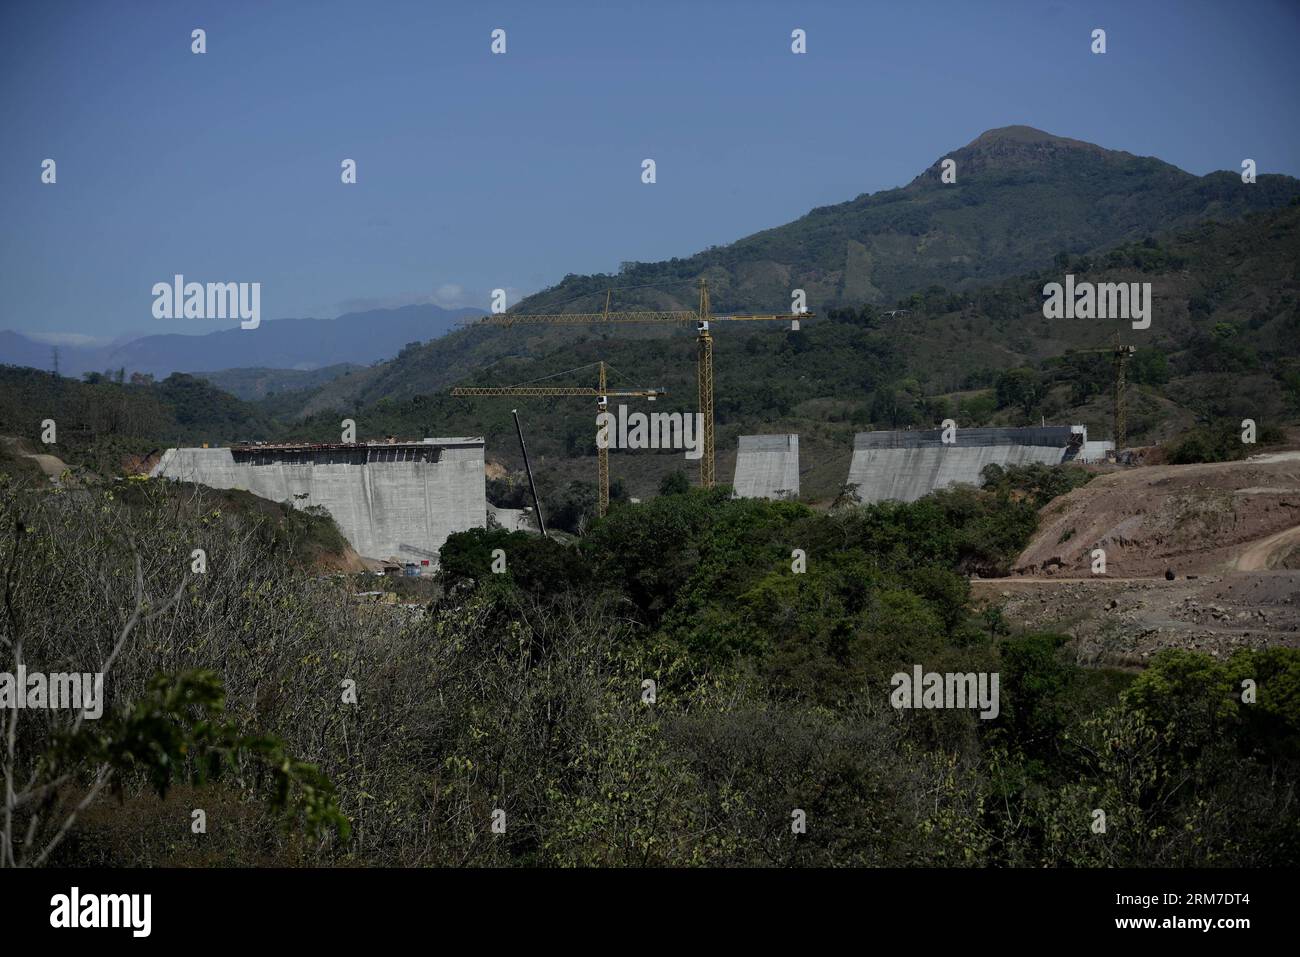 The hydroelectric project Barro Blanco is seen in Tole town, adjacent to the Ngabe Bugle indigenous region, 450 km west of Panama City, capital of Panama, on Feb. 26, 2014. The Ngabe Bugle indigenous region is located in the western region of Panama, and covers an area of 6,968 square km, with 91 per cent of its population living in extreme poverty. Native leaders of the Ngabe Bugle region declared a national alert , because of the eviction notice issued by a company which is developing the hydro-electric project Barro Blanco . The project will use the water from Tabasara river in Chiriqui pro Stock Photo